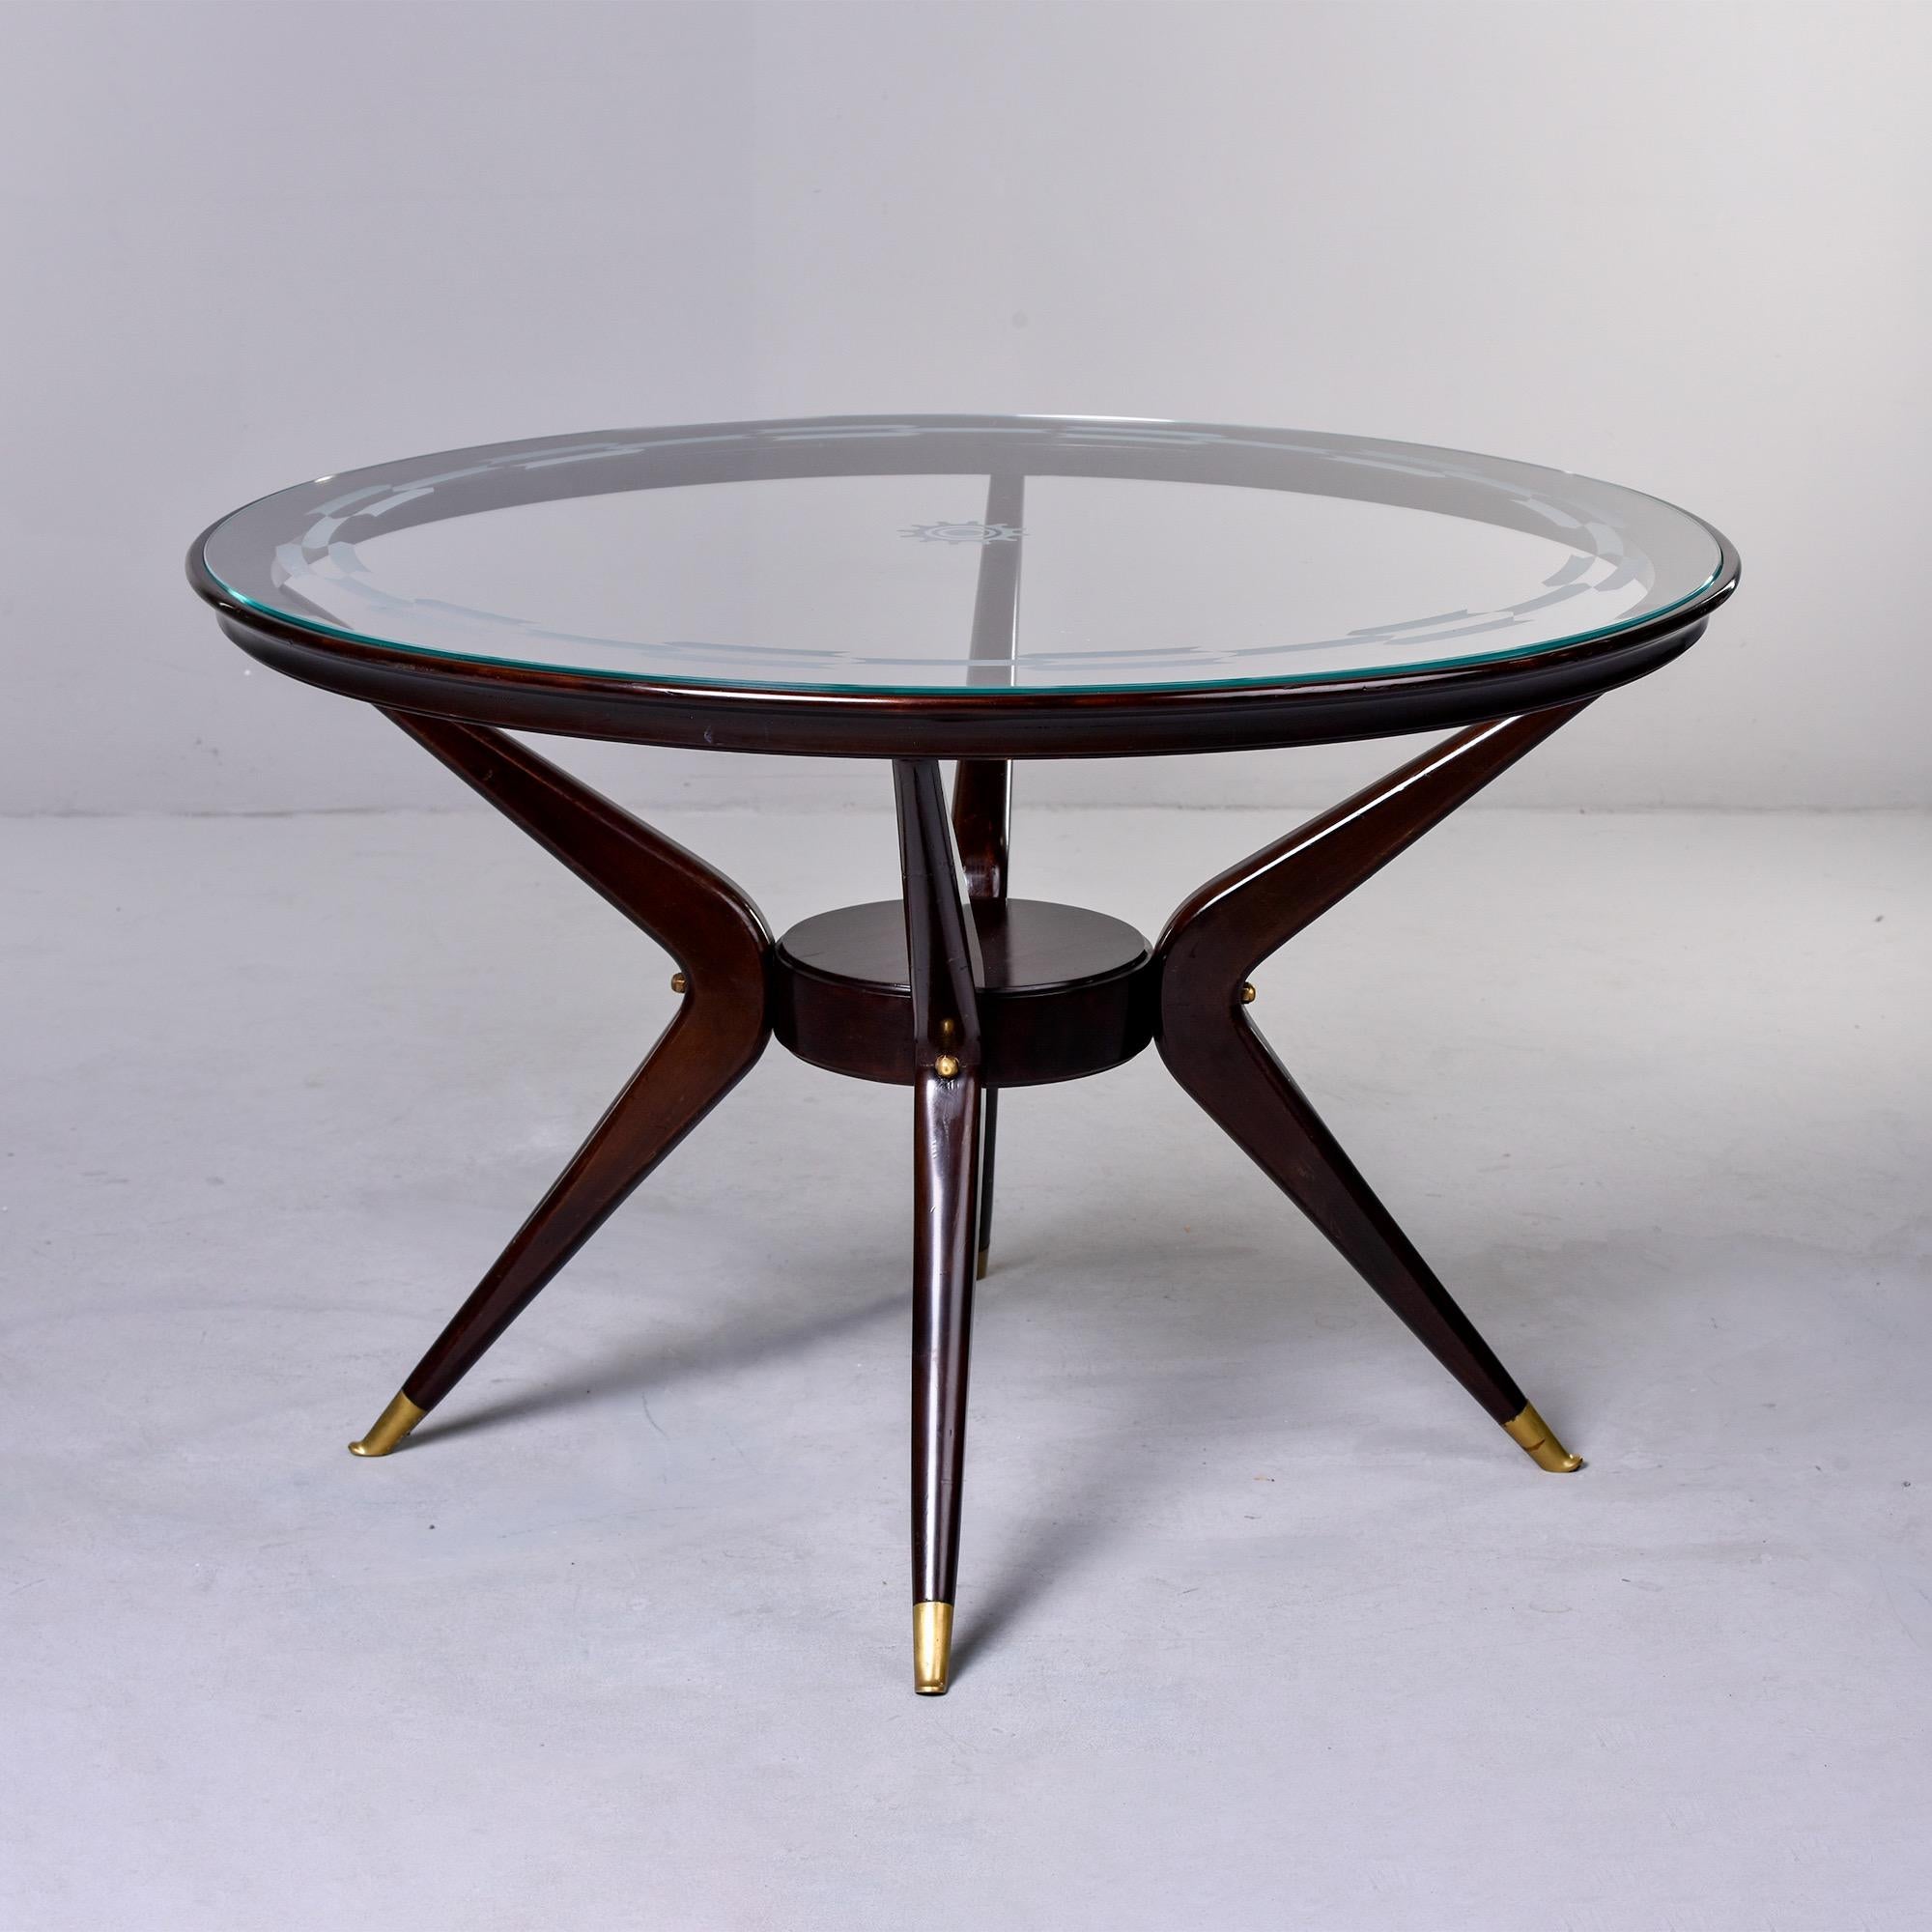 Circa 1970s Italian round table is just under 48” diameter and has a dark stained four leg wood frame with splayed and tapered brass capped legs. Inset glass top has a decorative etched border and small sunburst or gear wheel in center. Versatile